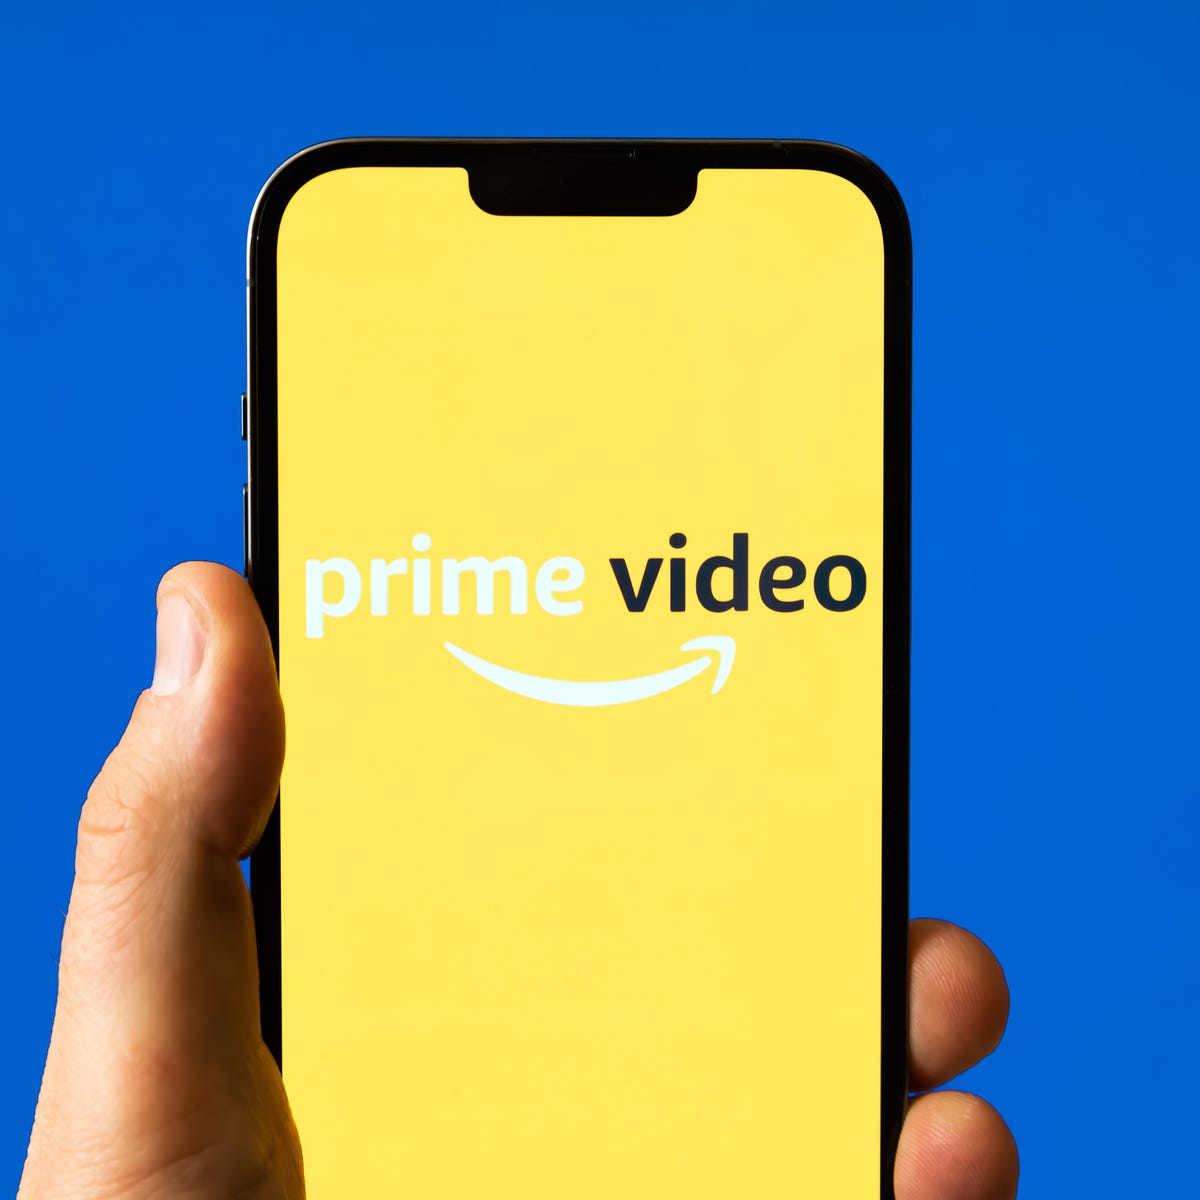 Streaming Prime Video With Ads Is Light Work - CNET